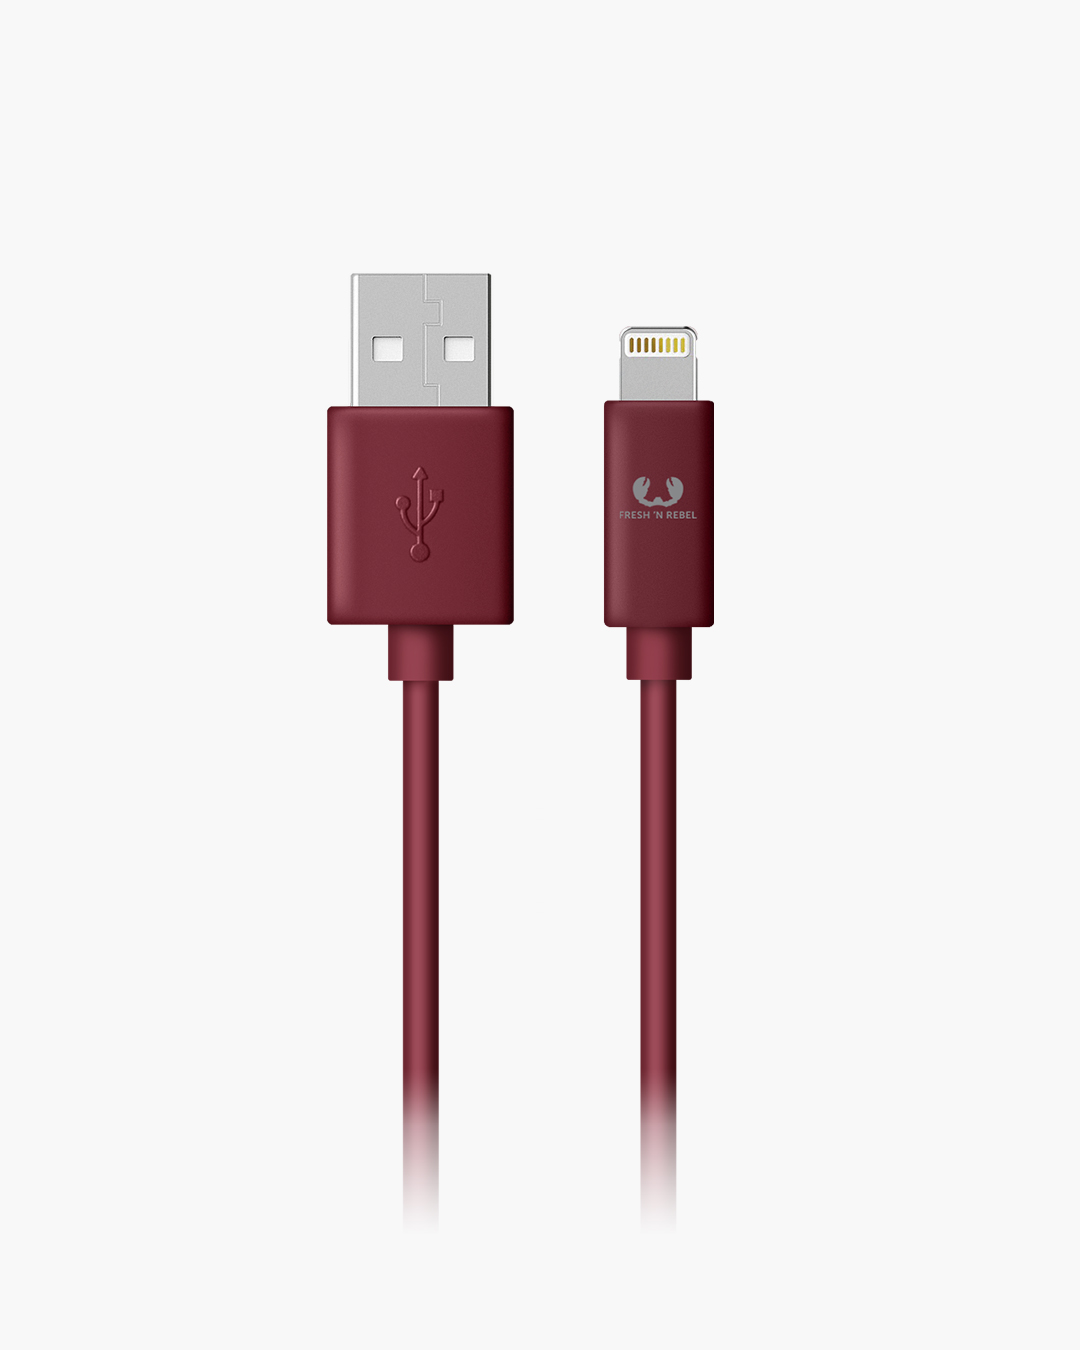 Fresh 'n Rebel - USB to Apple Lightning cable 0,2m - Ruby Red